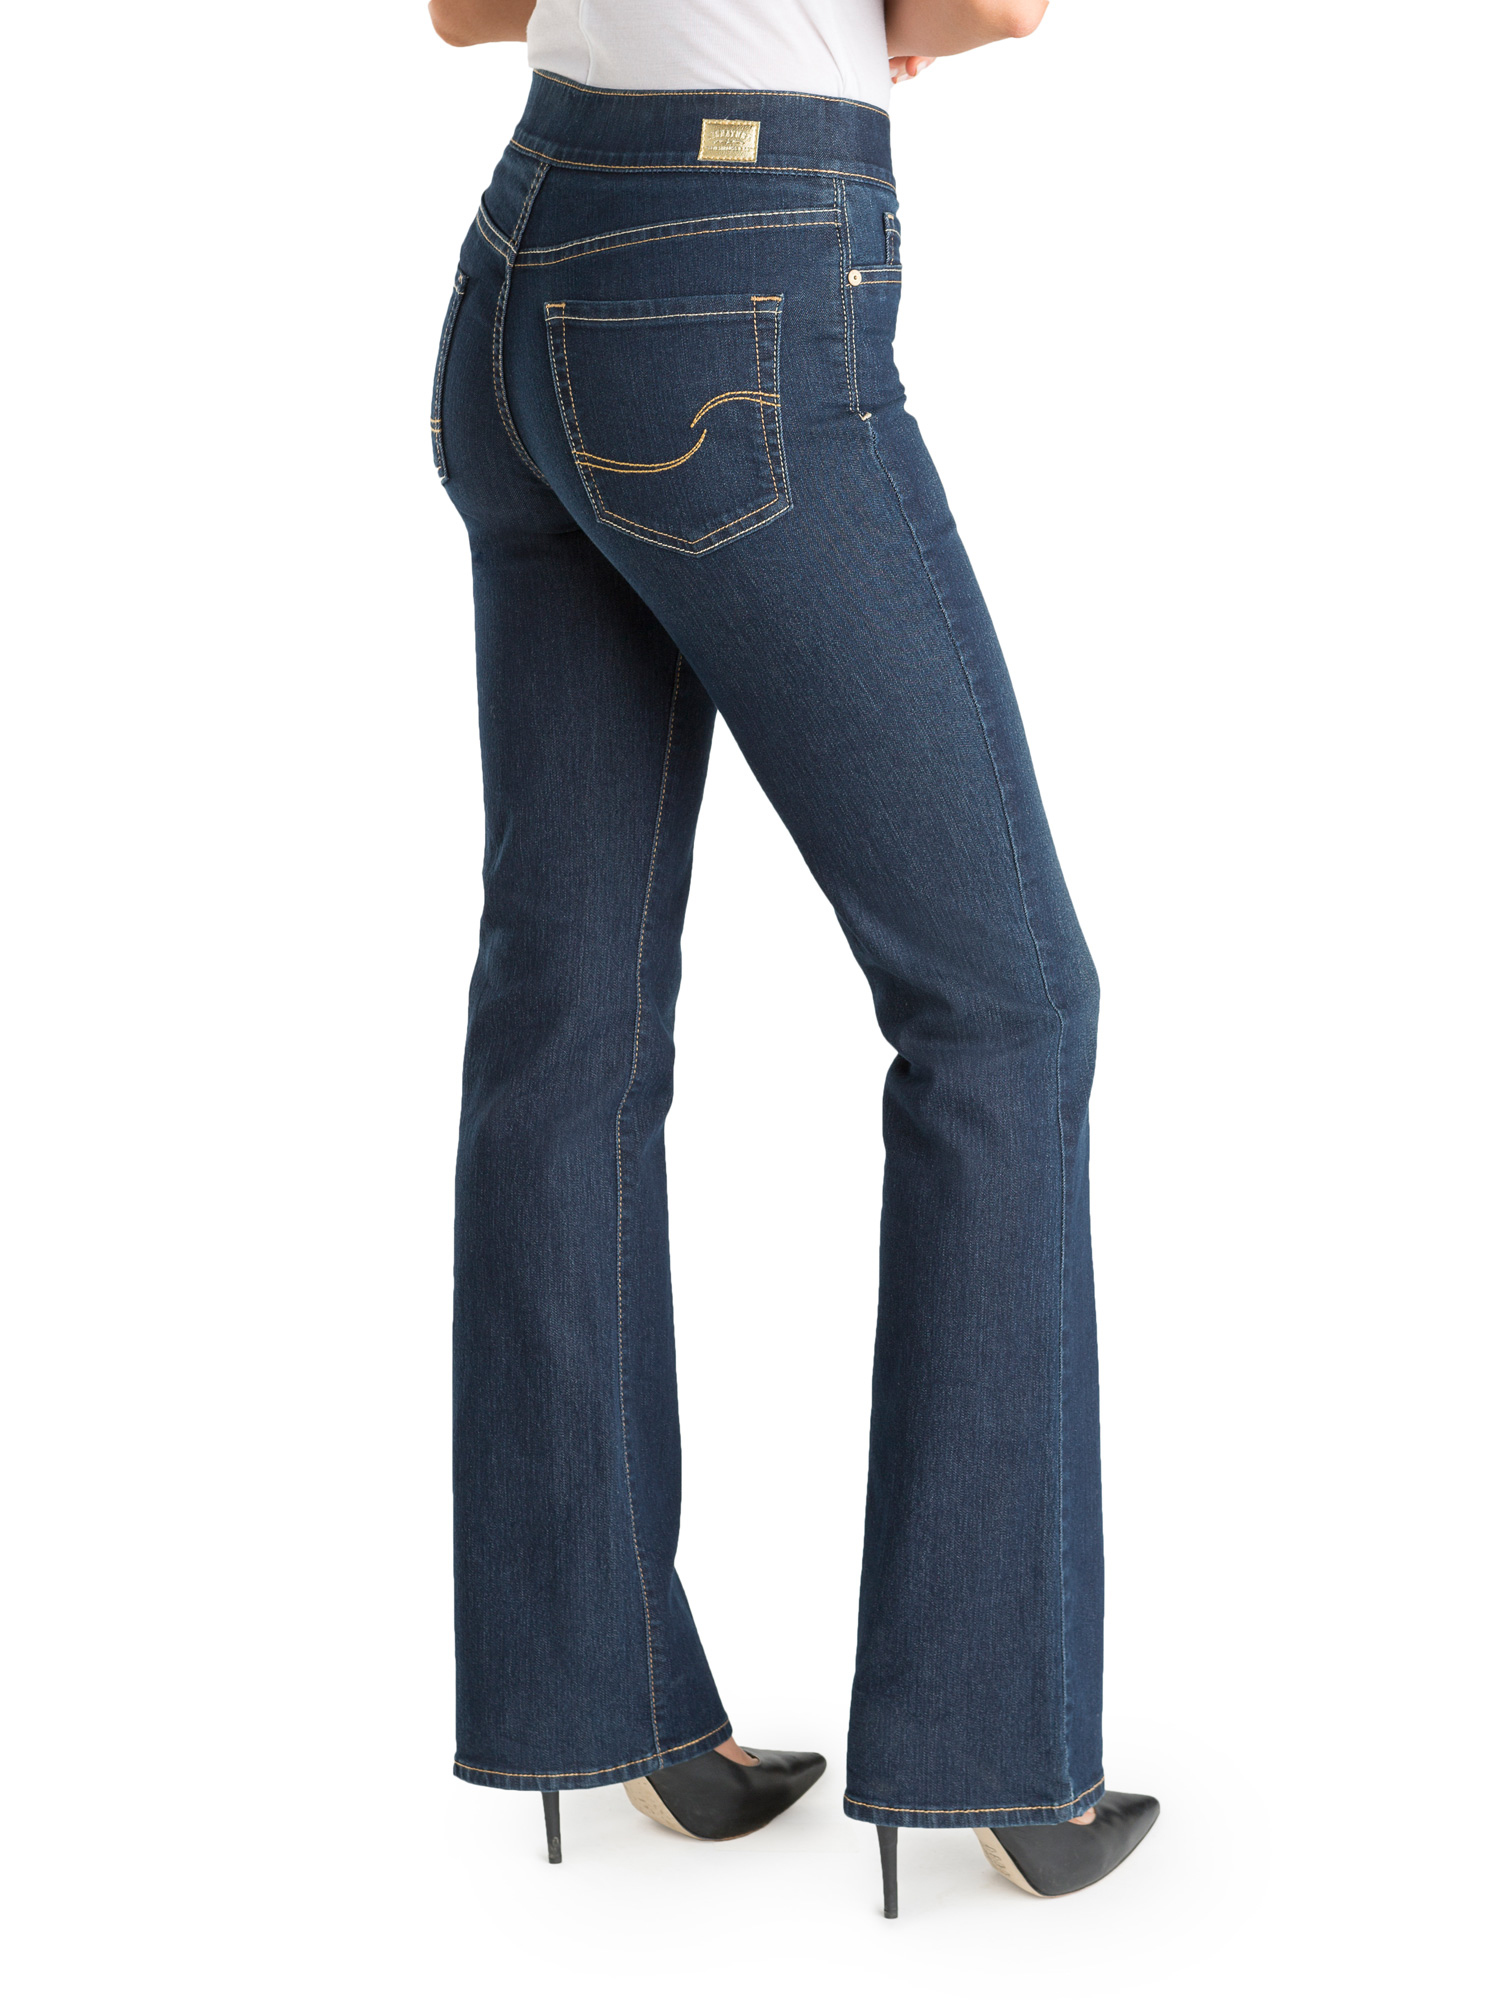 Signature by Levi Strauss & Co. Women's Totally Shaping Pull On Bootcut Jeans - image 3 of 3